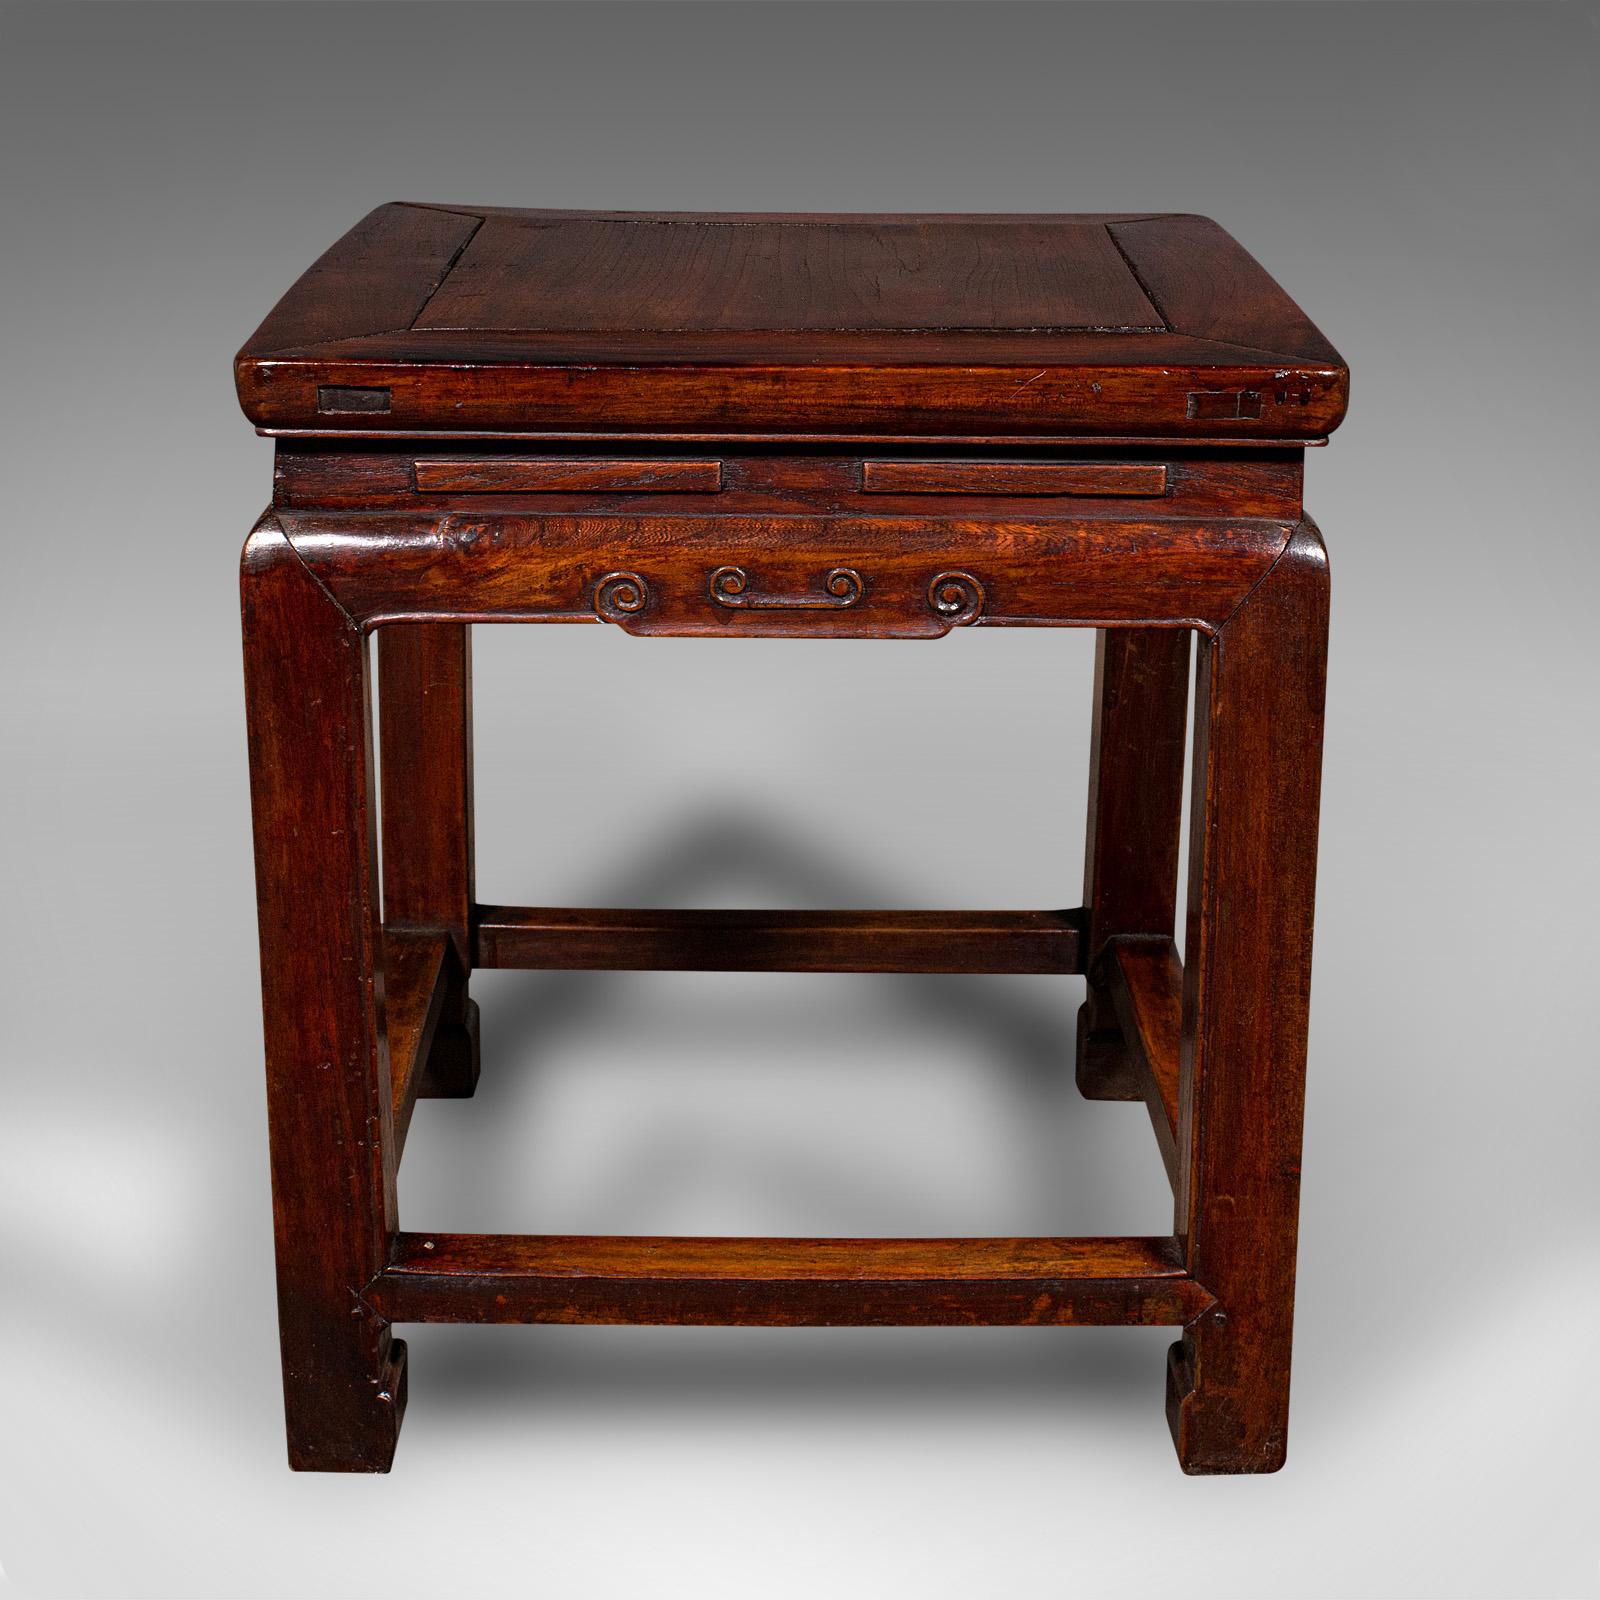 19th Century Small Antique Occasional Table, Oriental, Chinese Elm, Accent Stool, Victorian